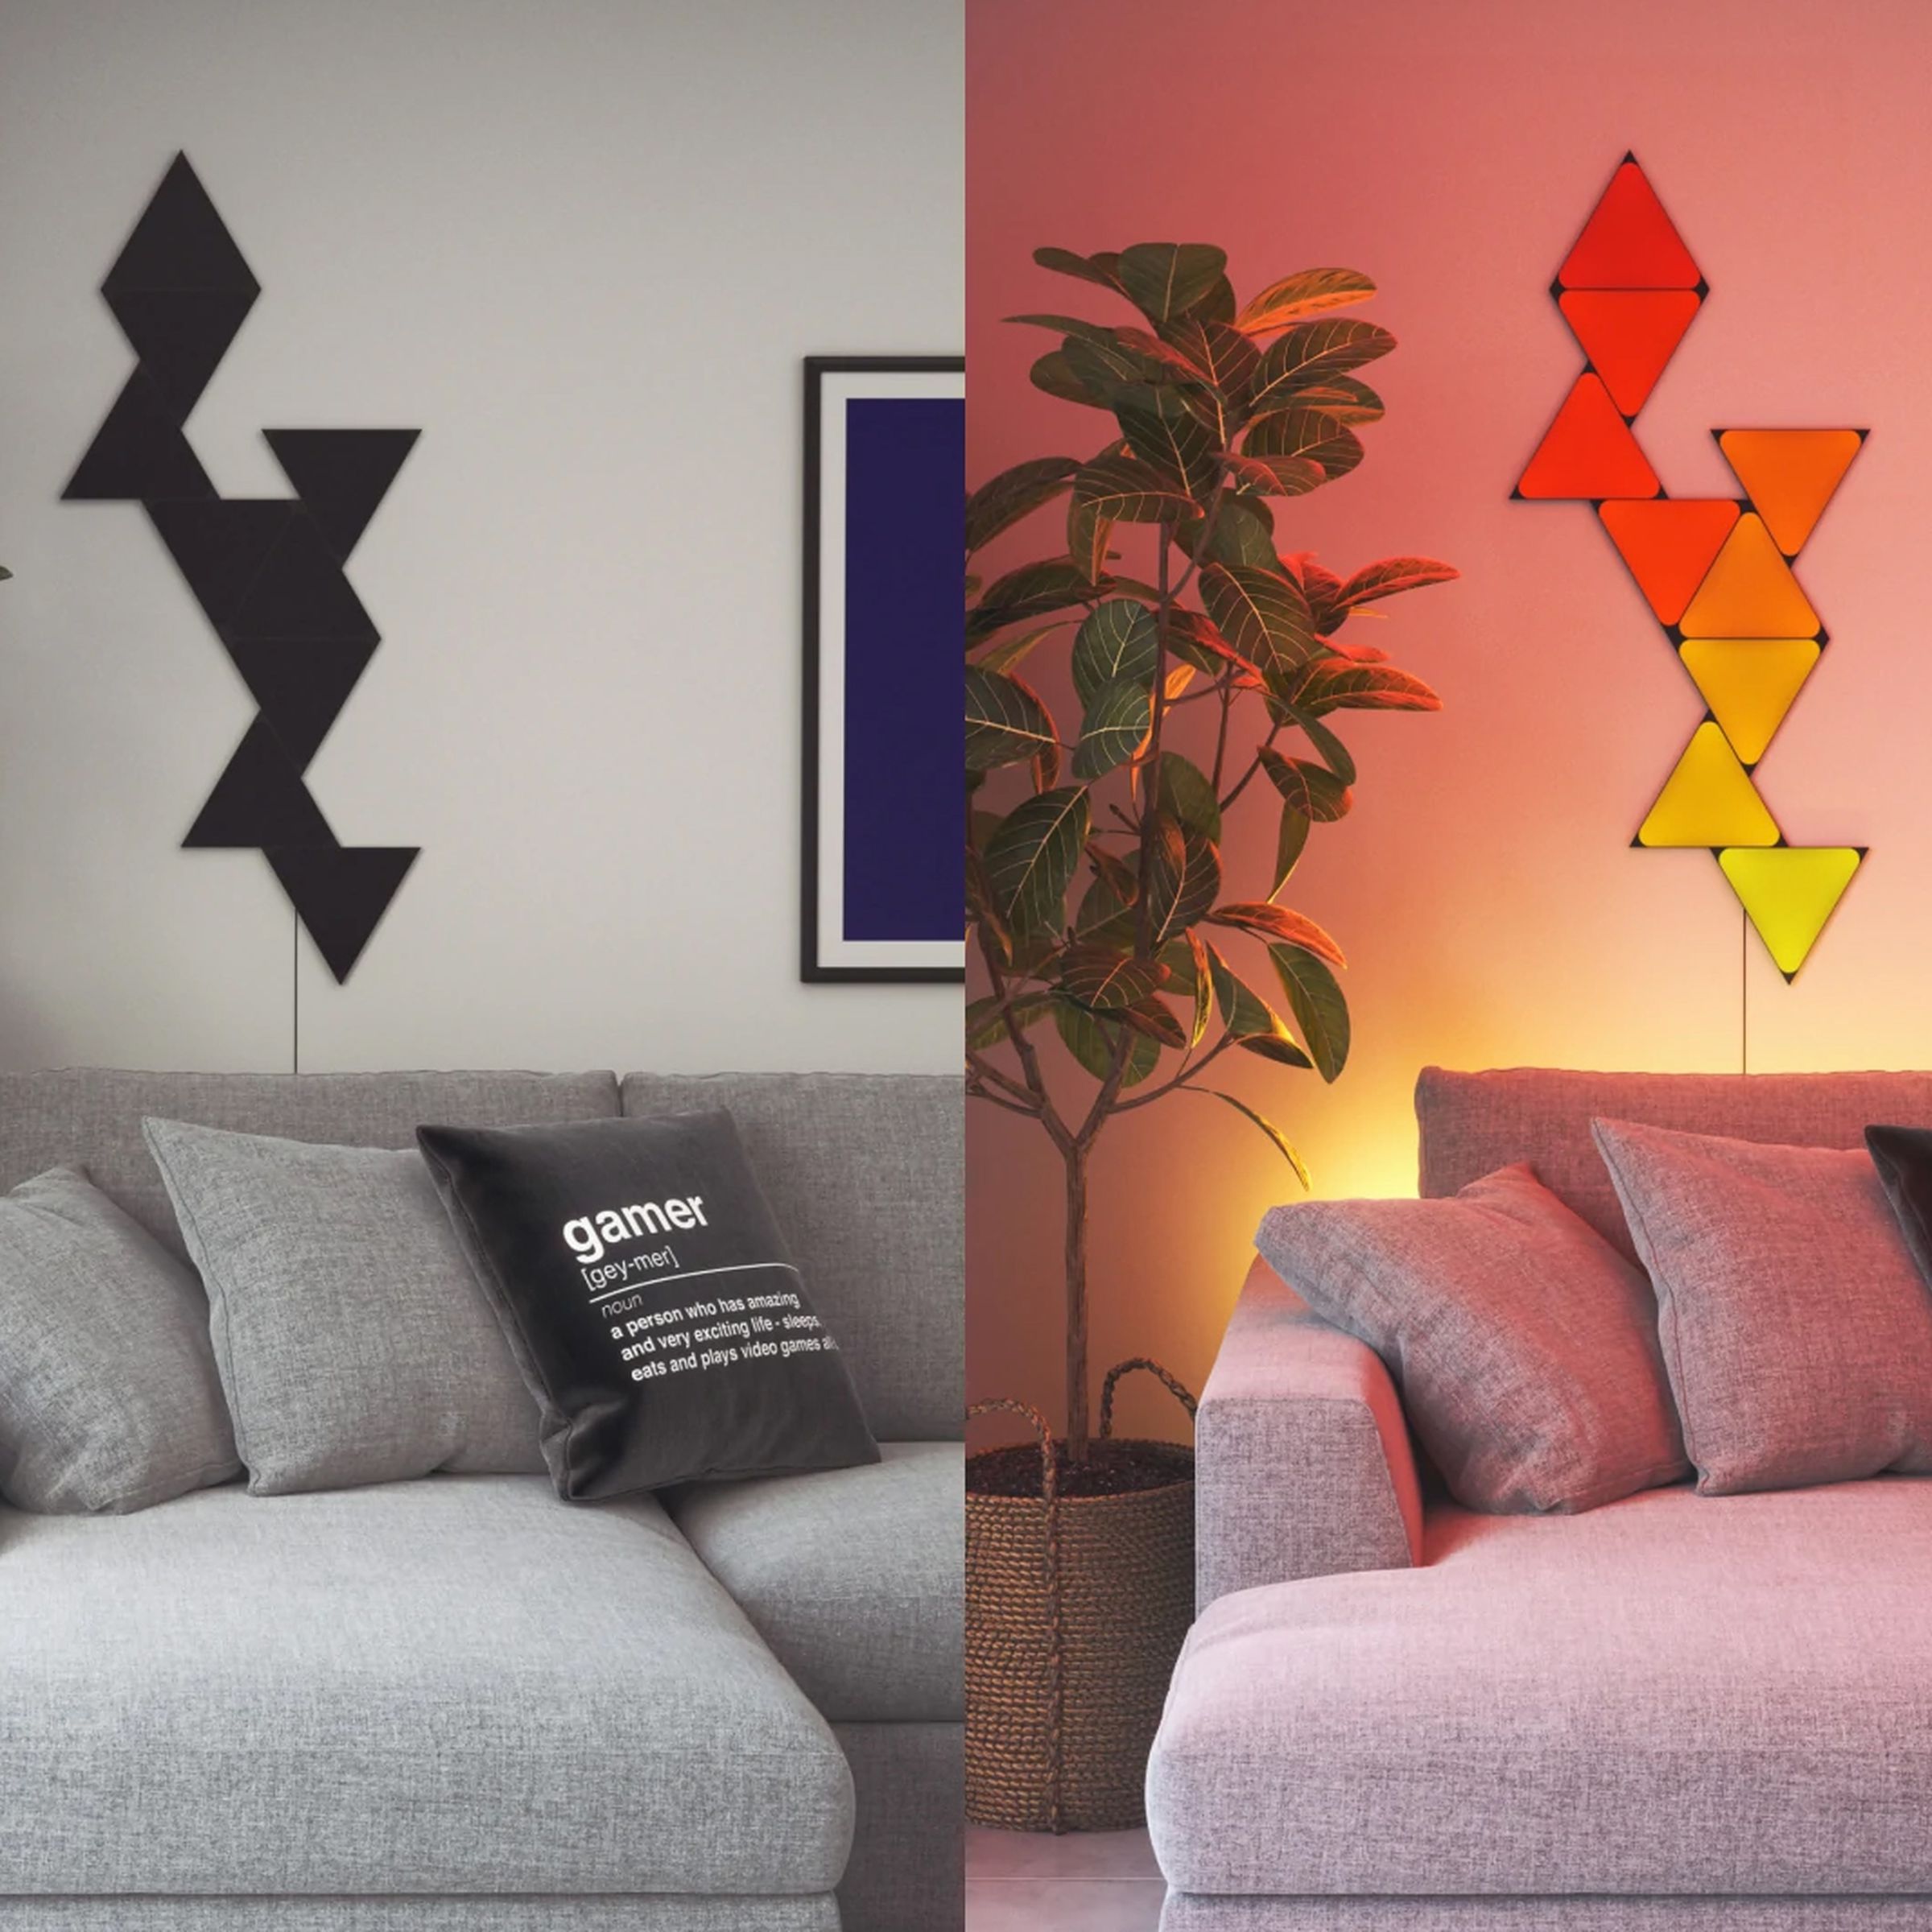 A side-by-side image of the Nanoleaf Ultra Black Triangles on a wall. The image on the left shows them turned off, and the image on the right shows them lit up in red and yellow.